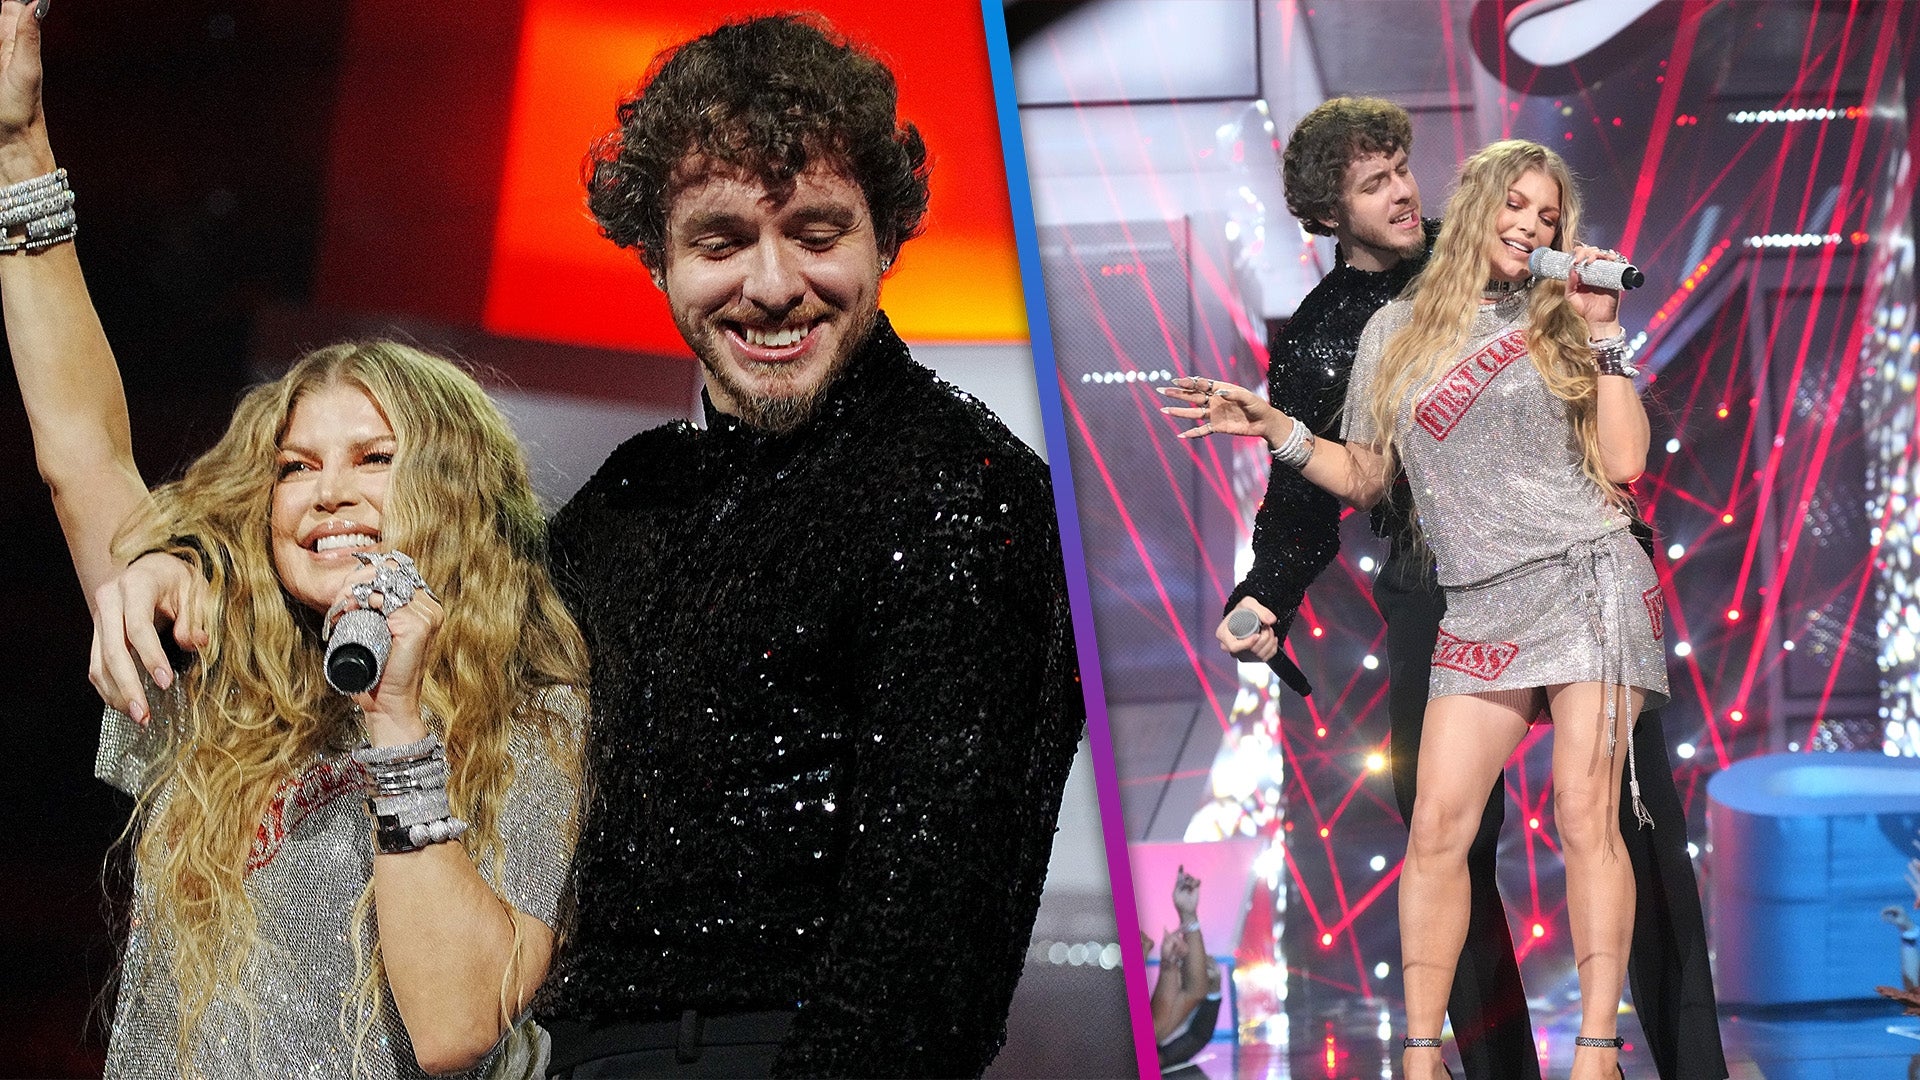 VMAs: Fergie Surprises Crowd During Jack Harlow's 'First Class' Performance